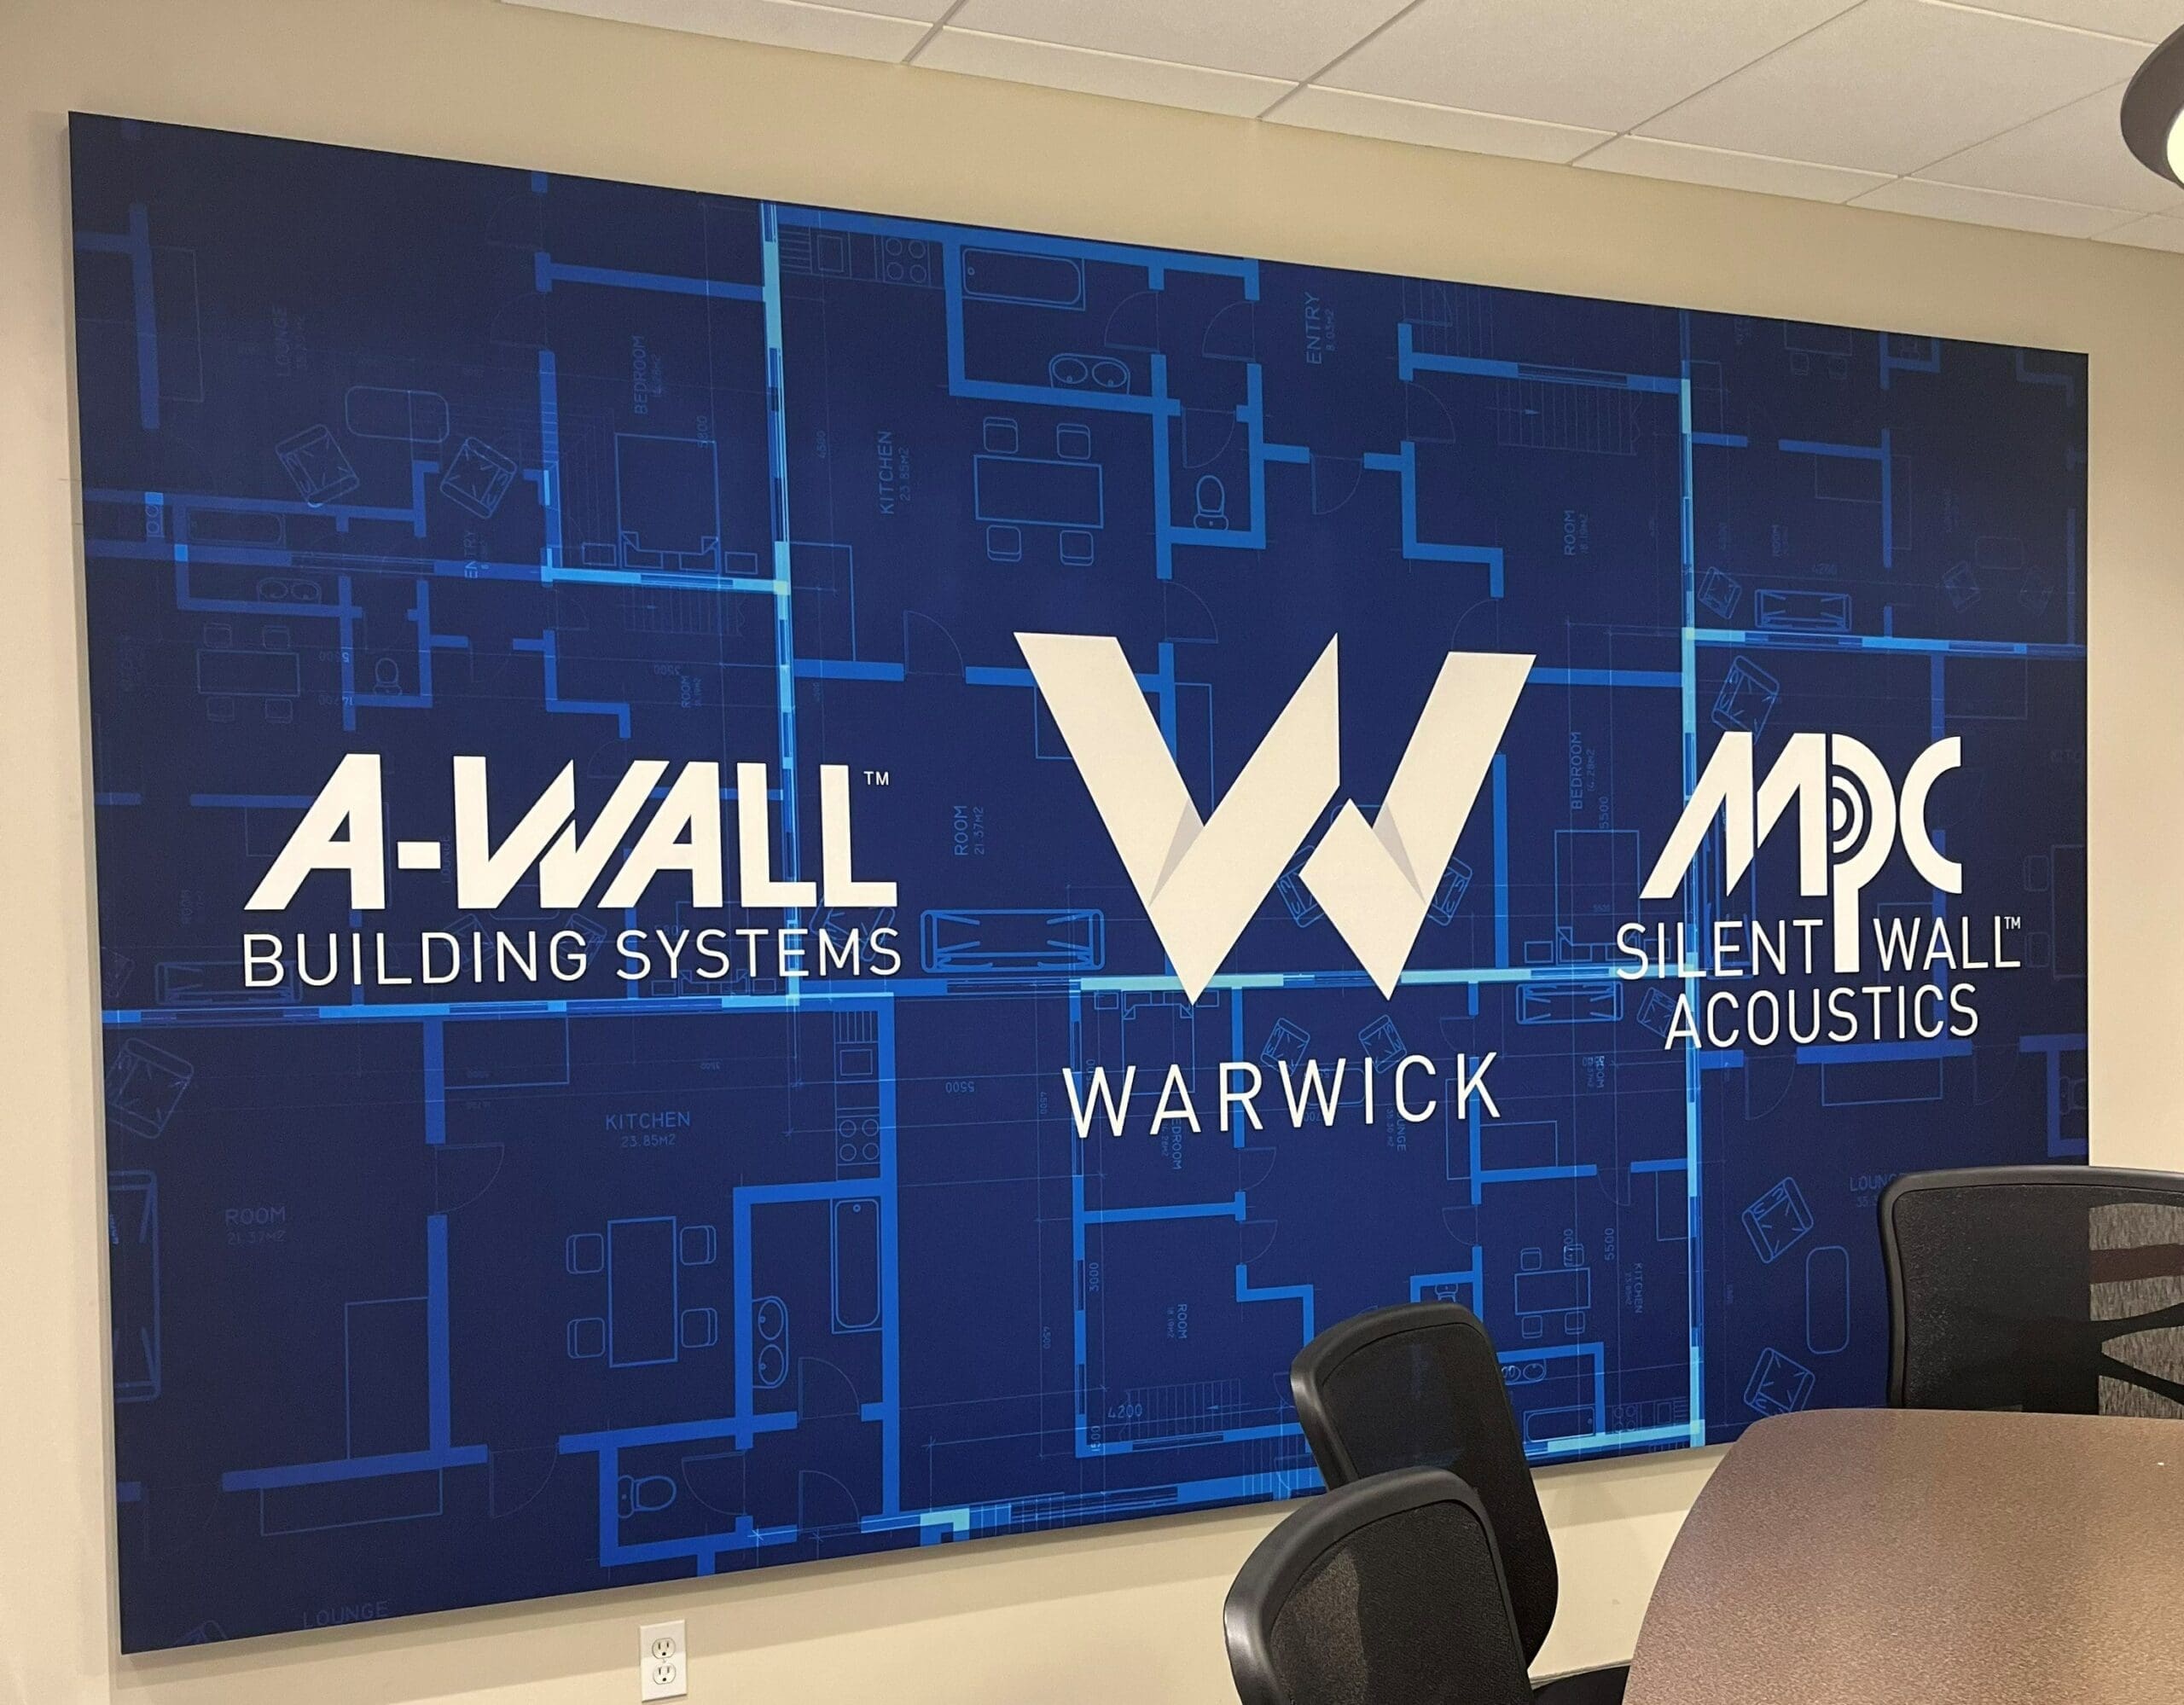 Company Logos printed on an Acoustical Panel